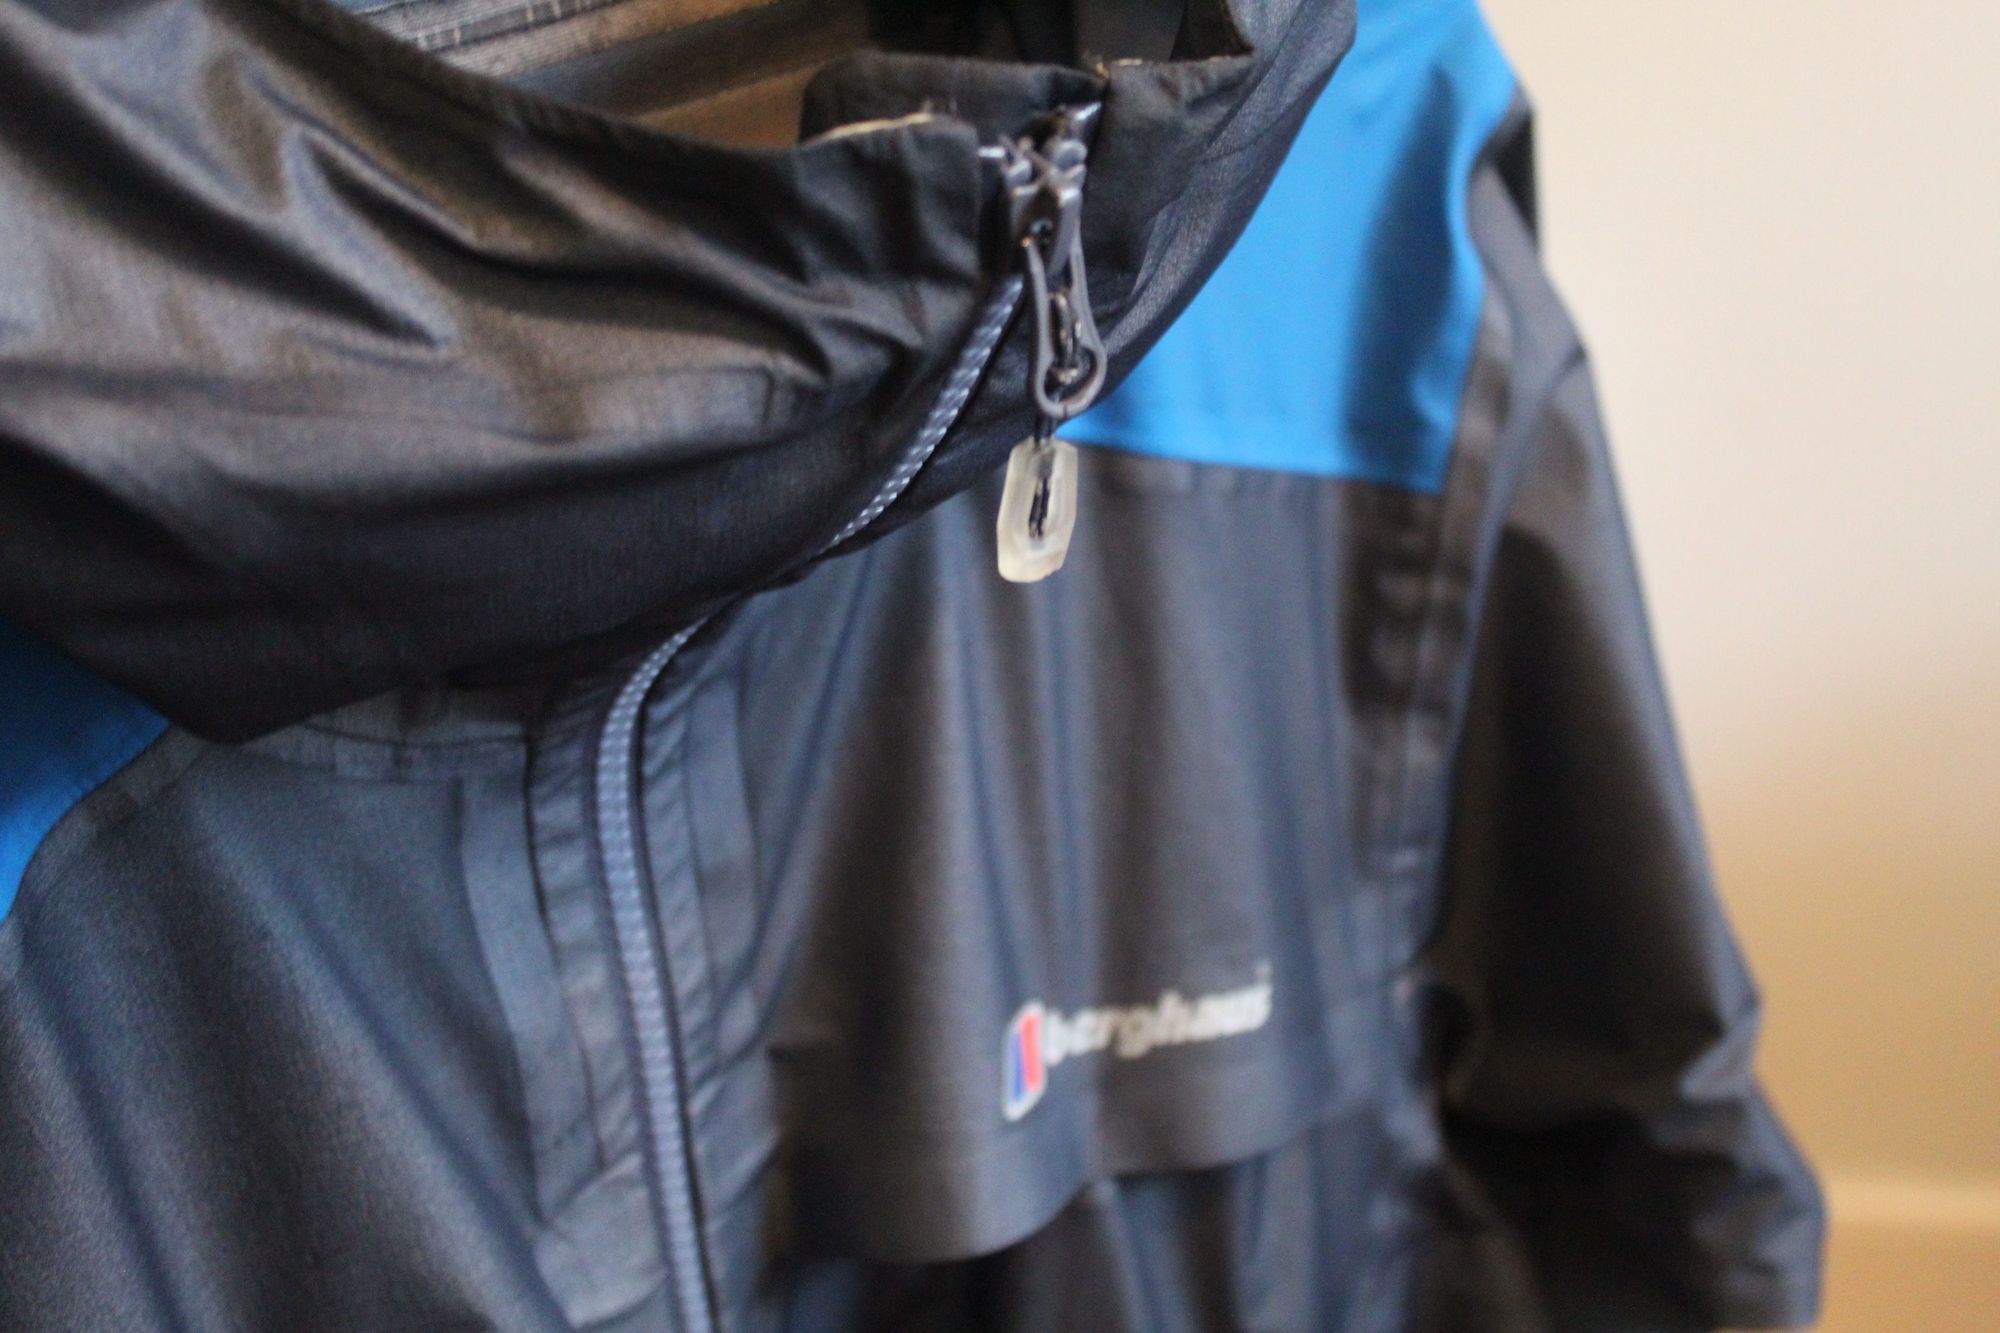 How to Re-Waterproof Your Jacket